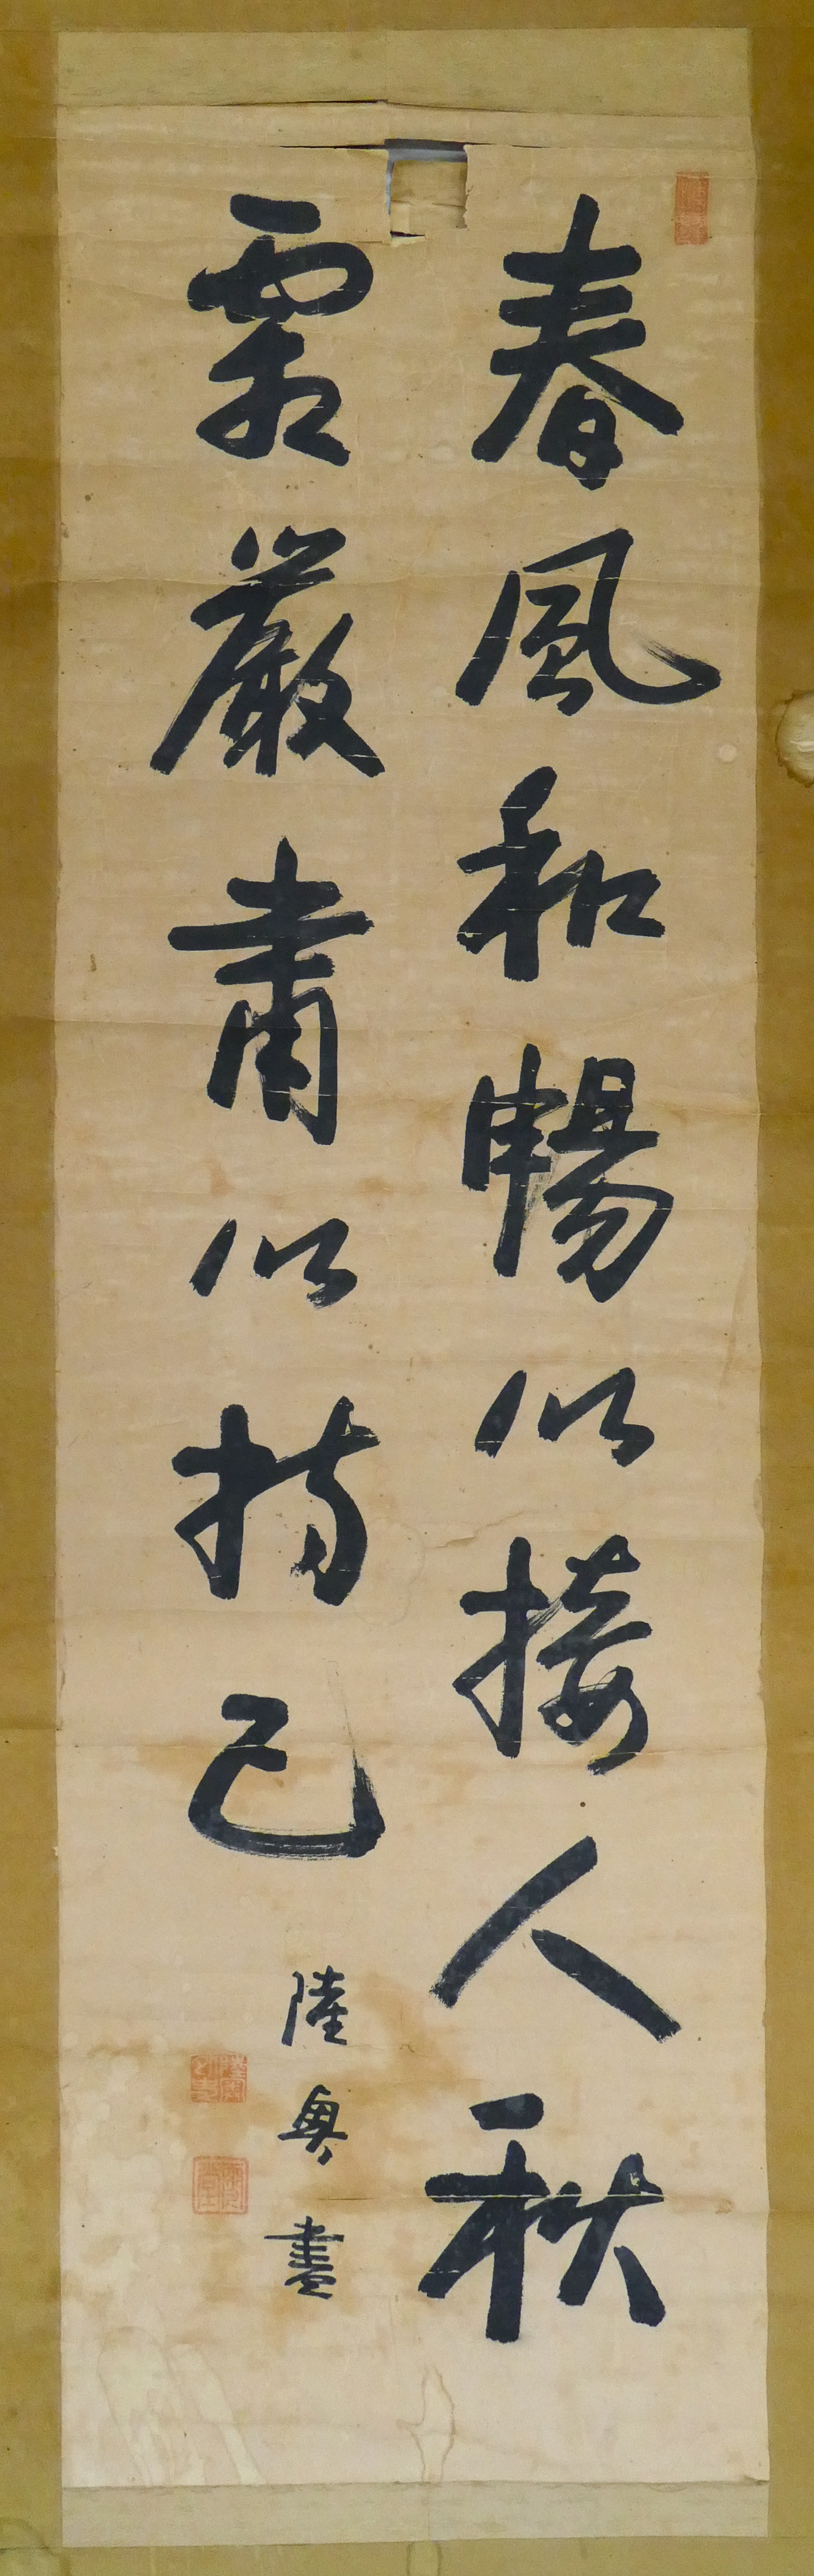 Old Chinese Calligraphy Scroll